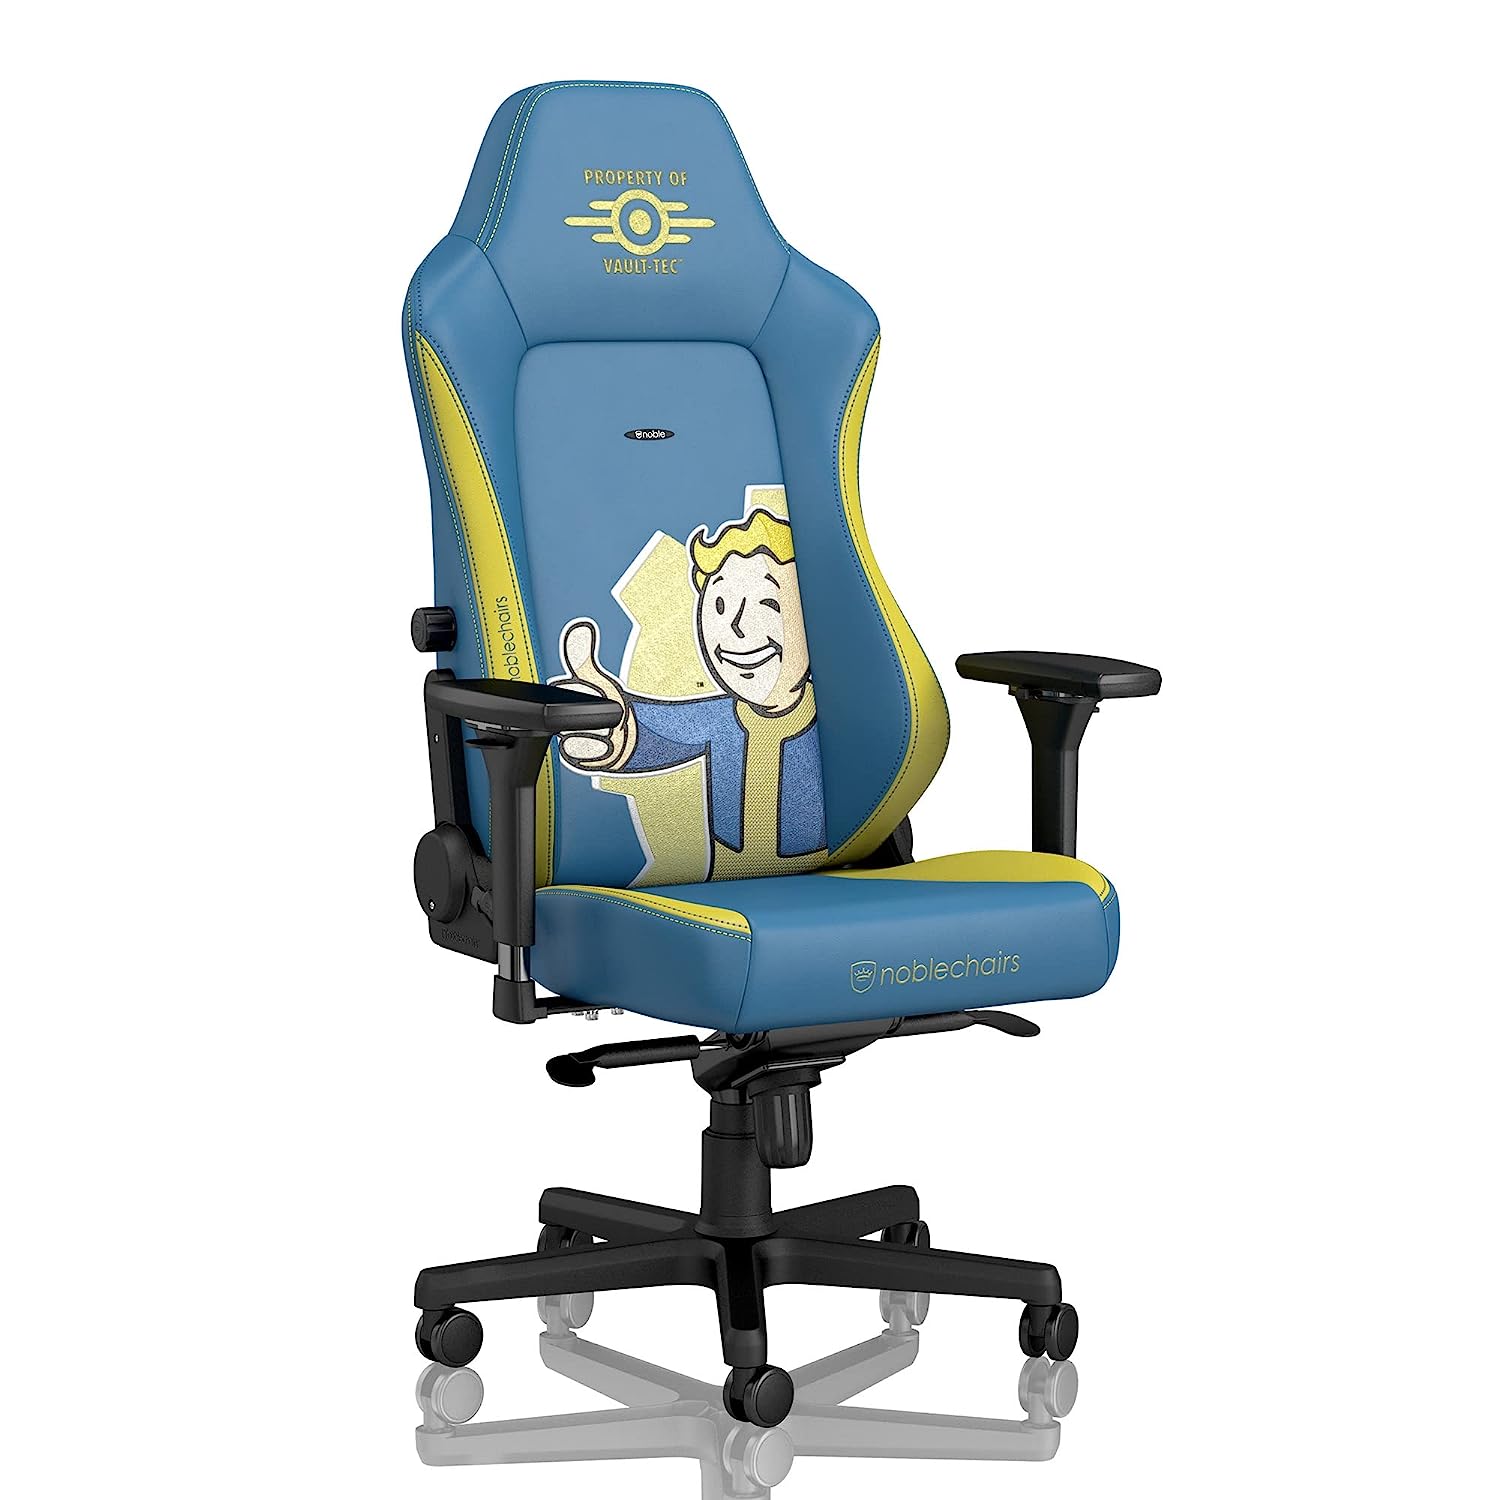 FO76 Gaming Chair